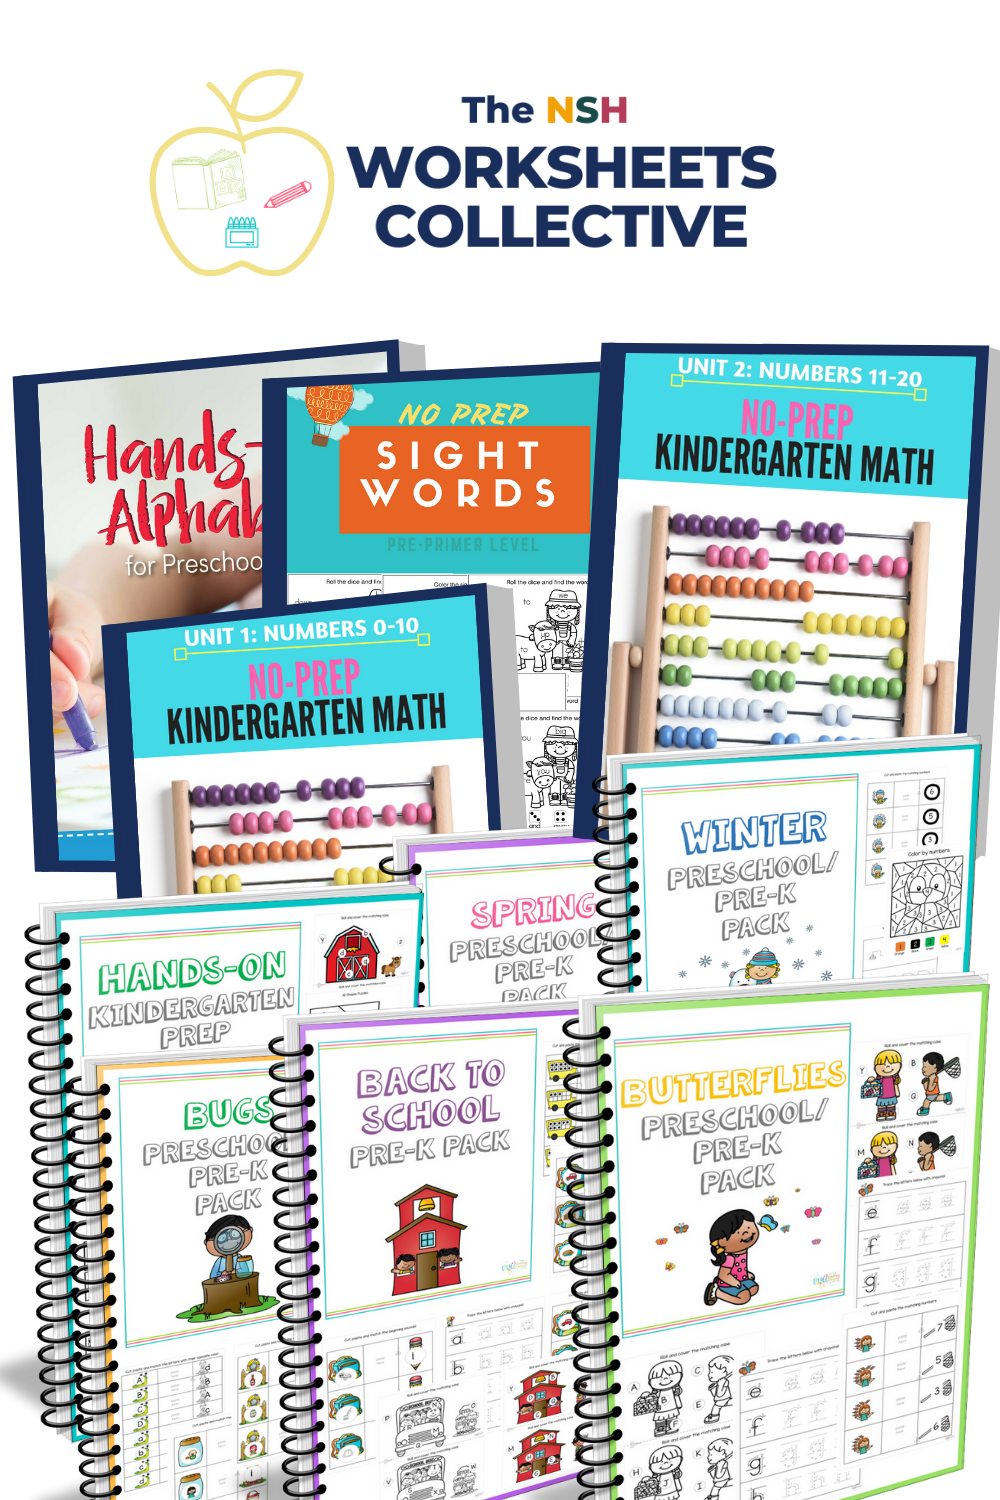 The NSH Worksheets Collective (over 200 printables)